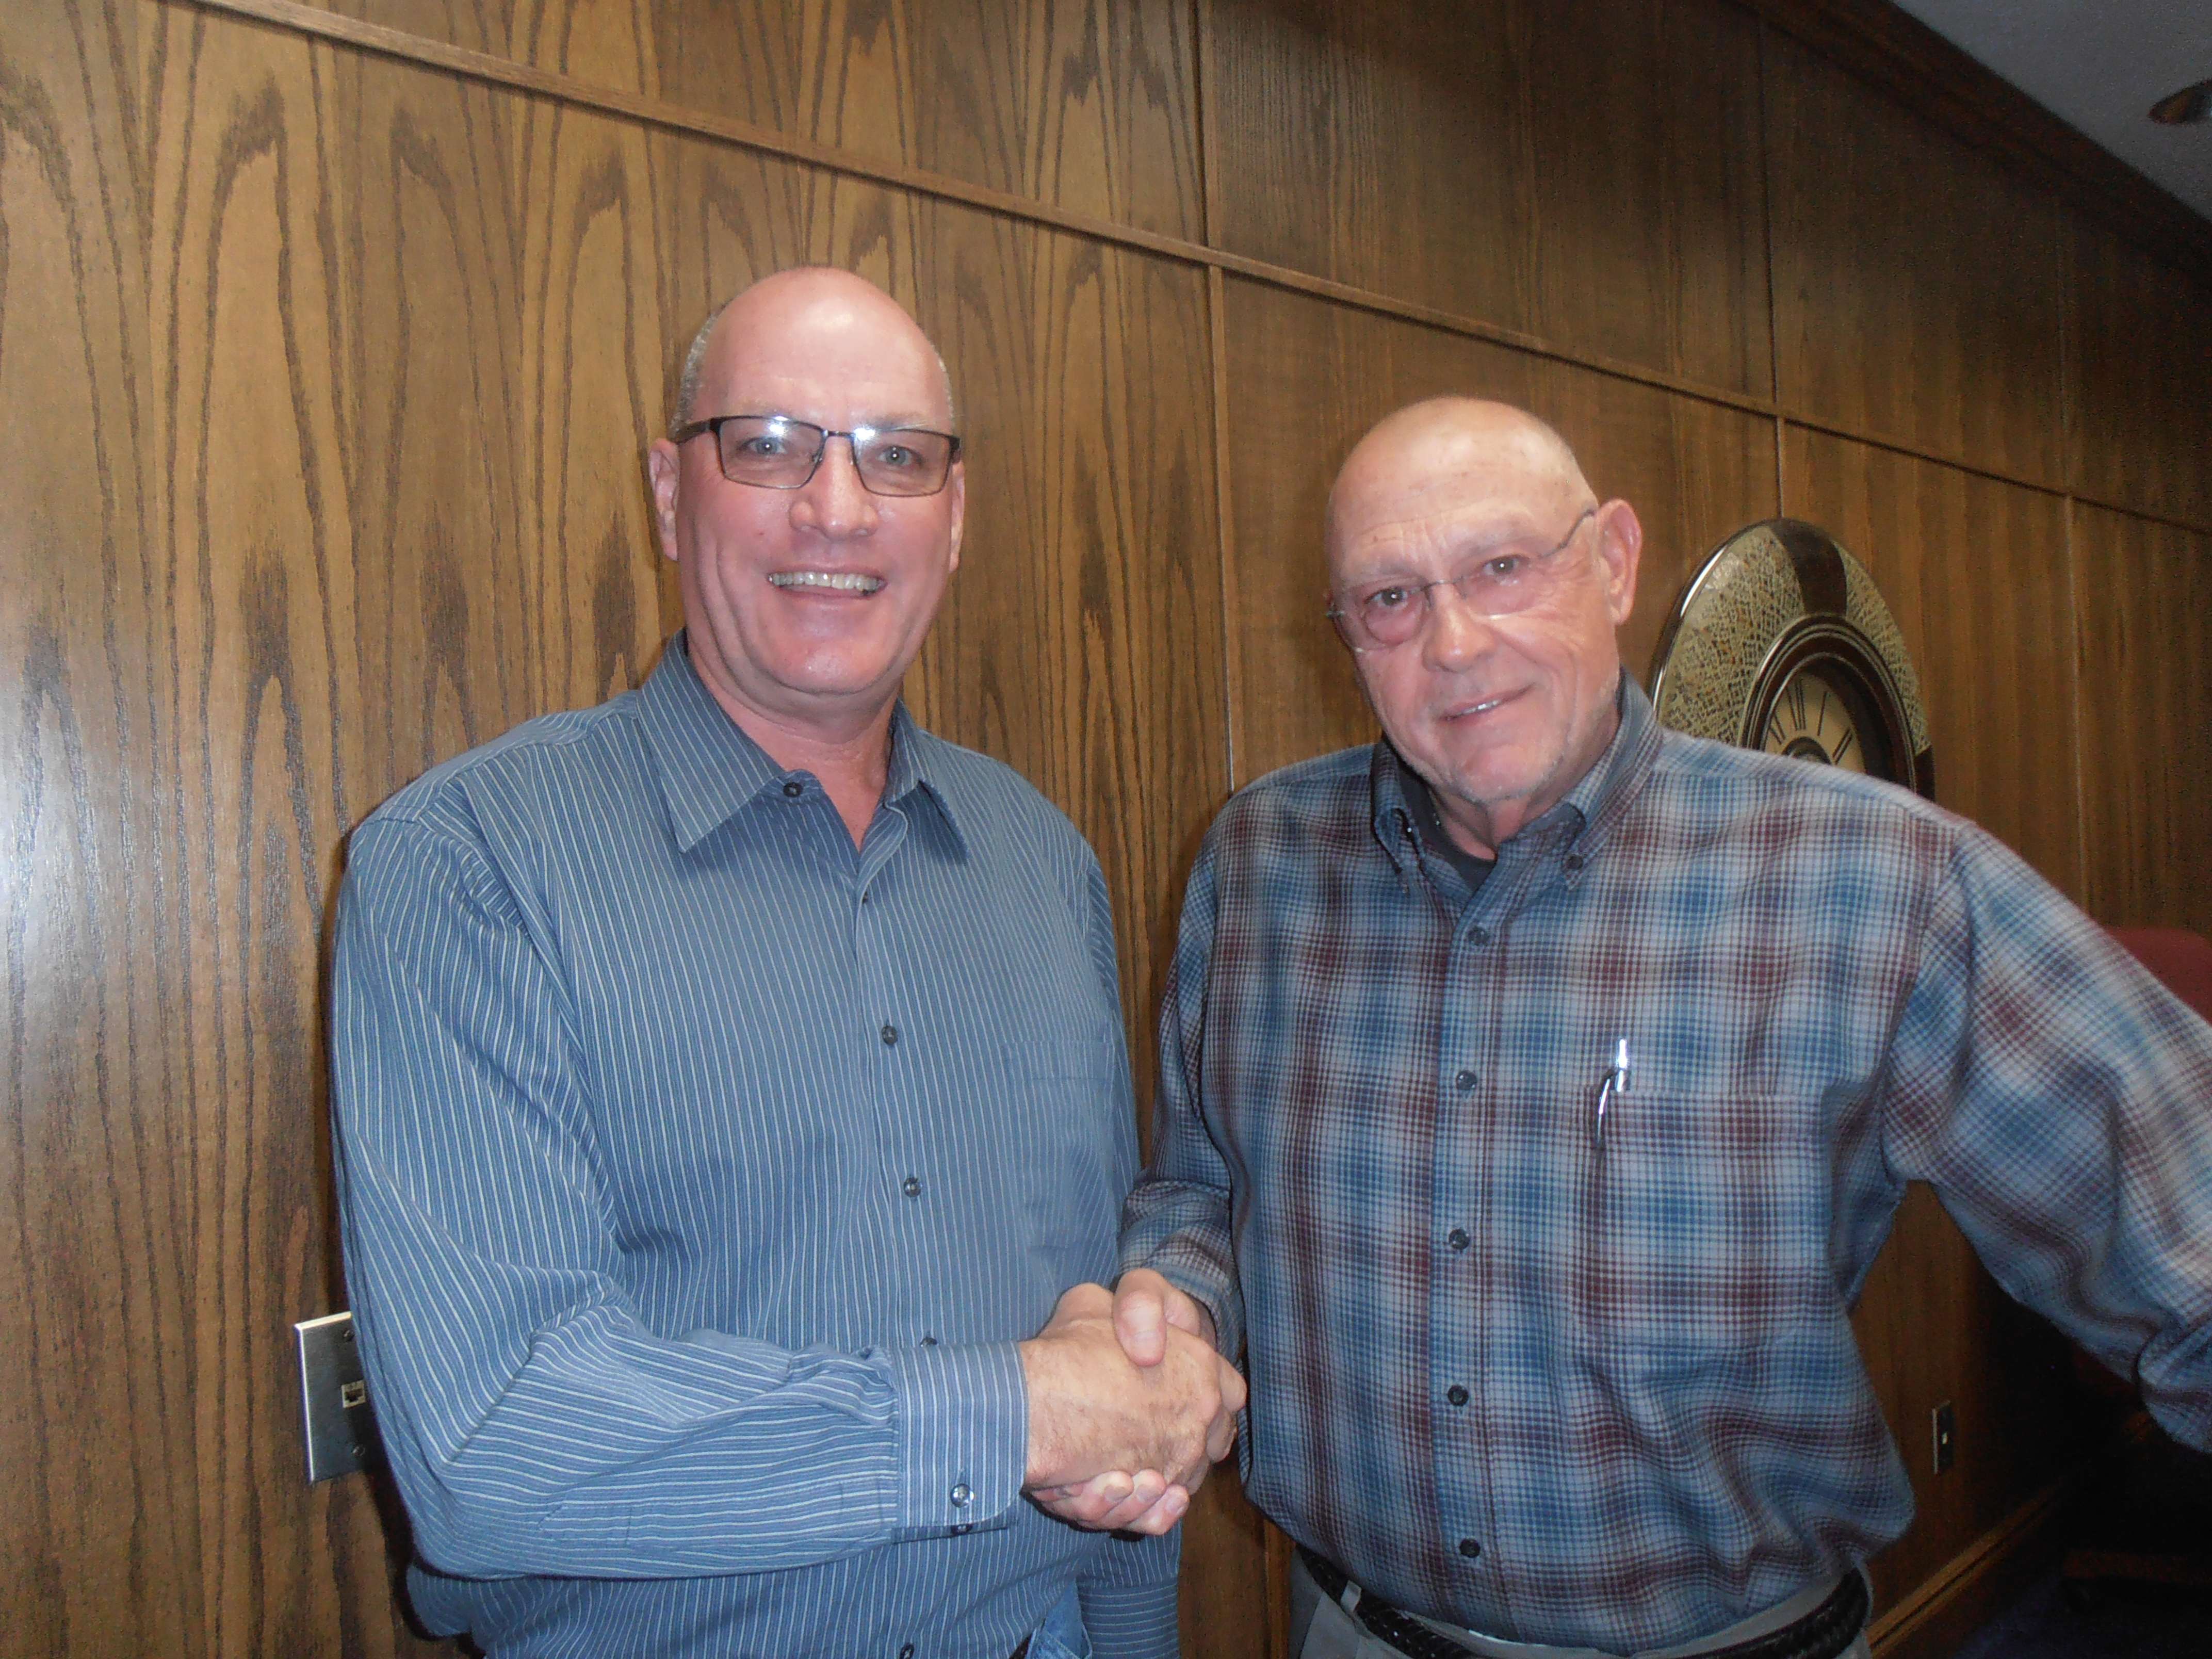 Ryel Appointed to NWTC Board